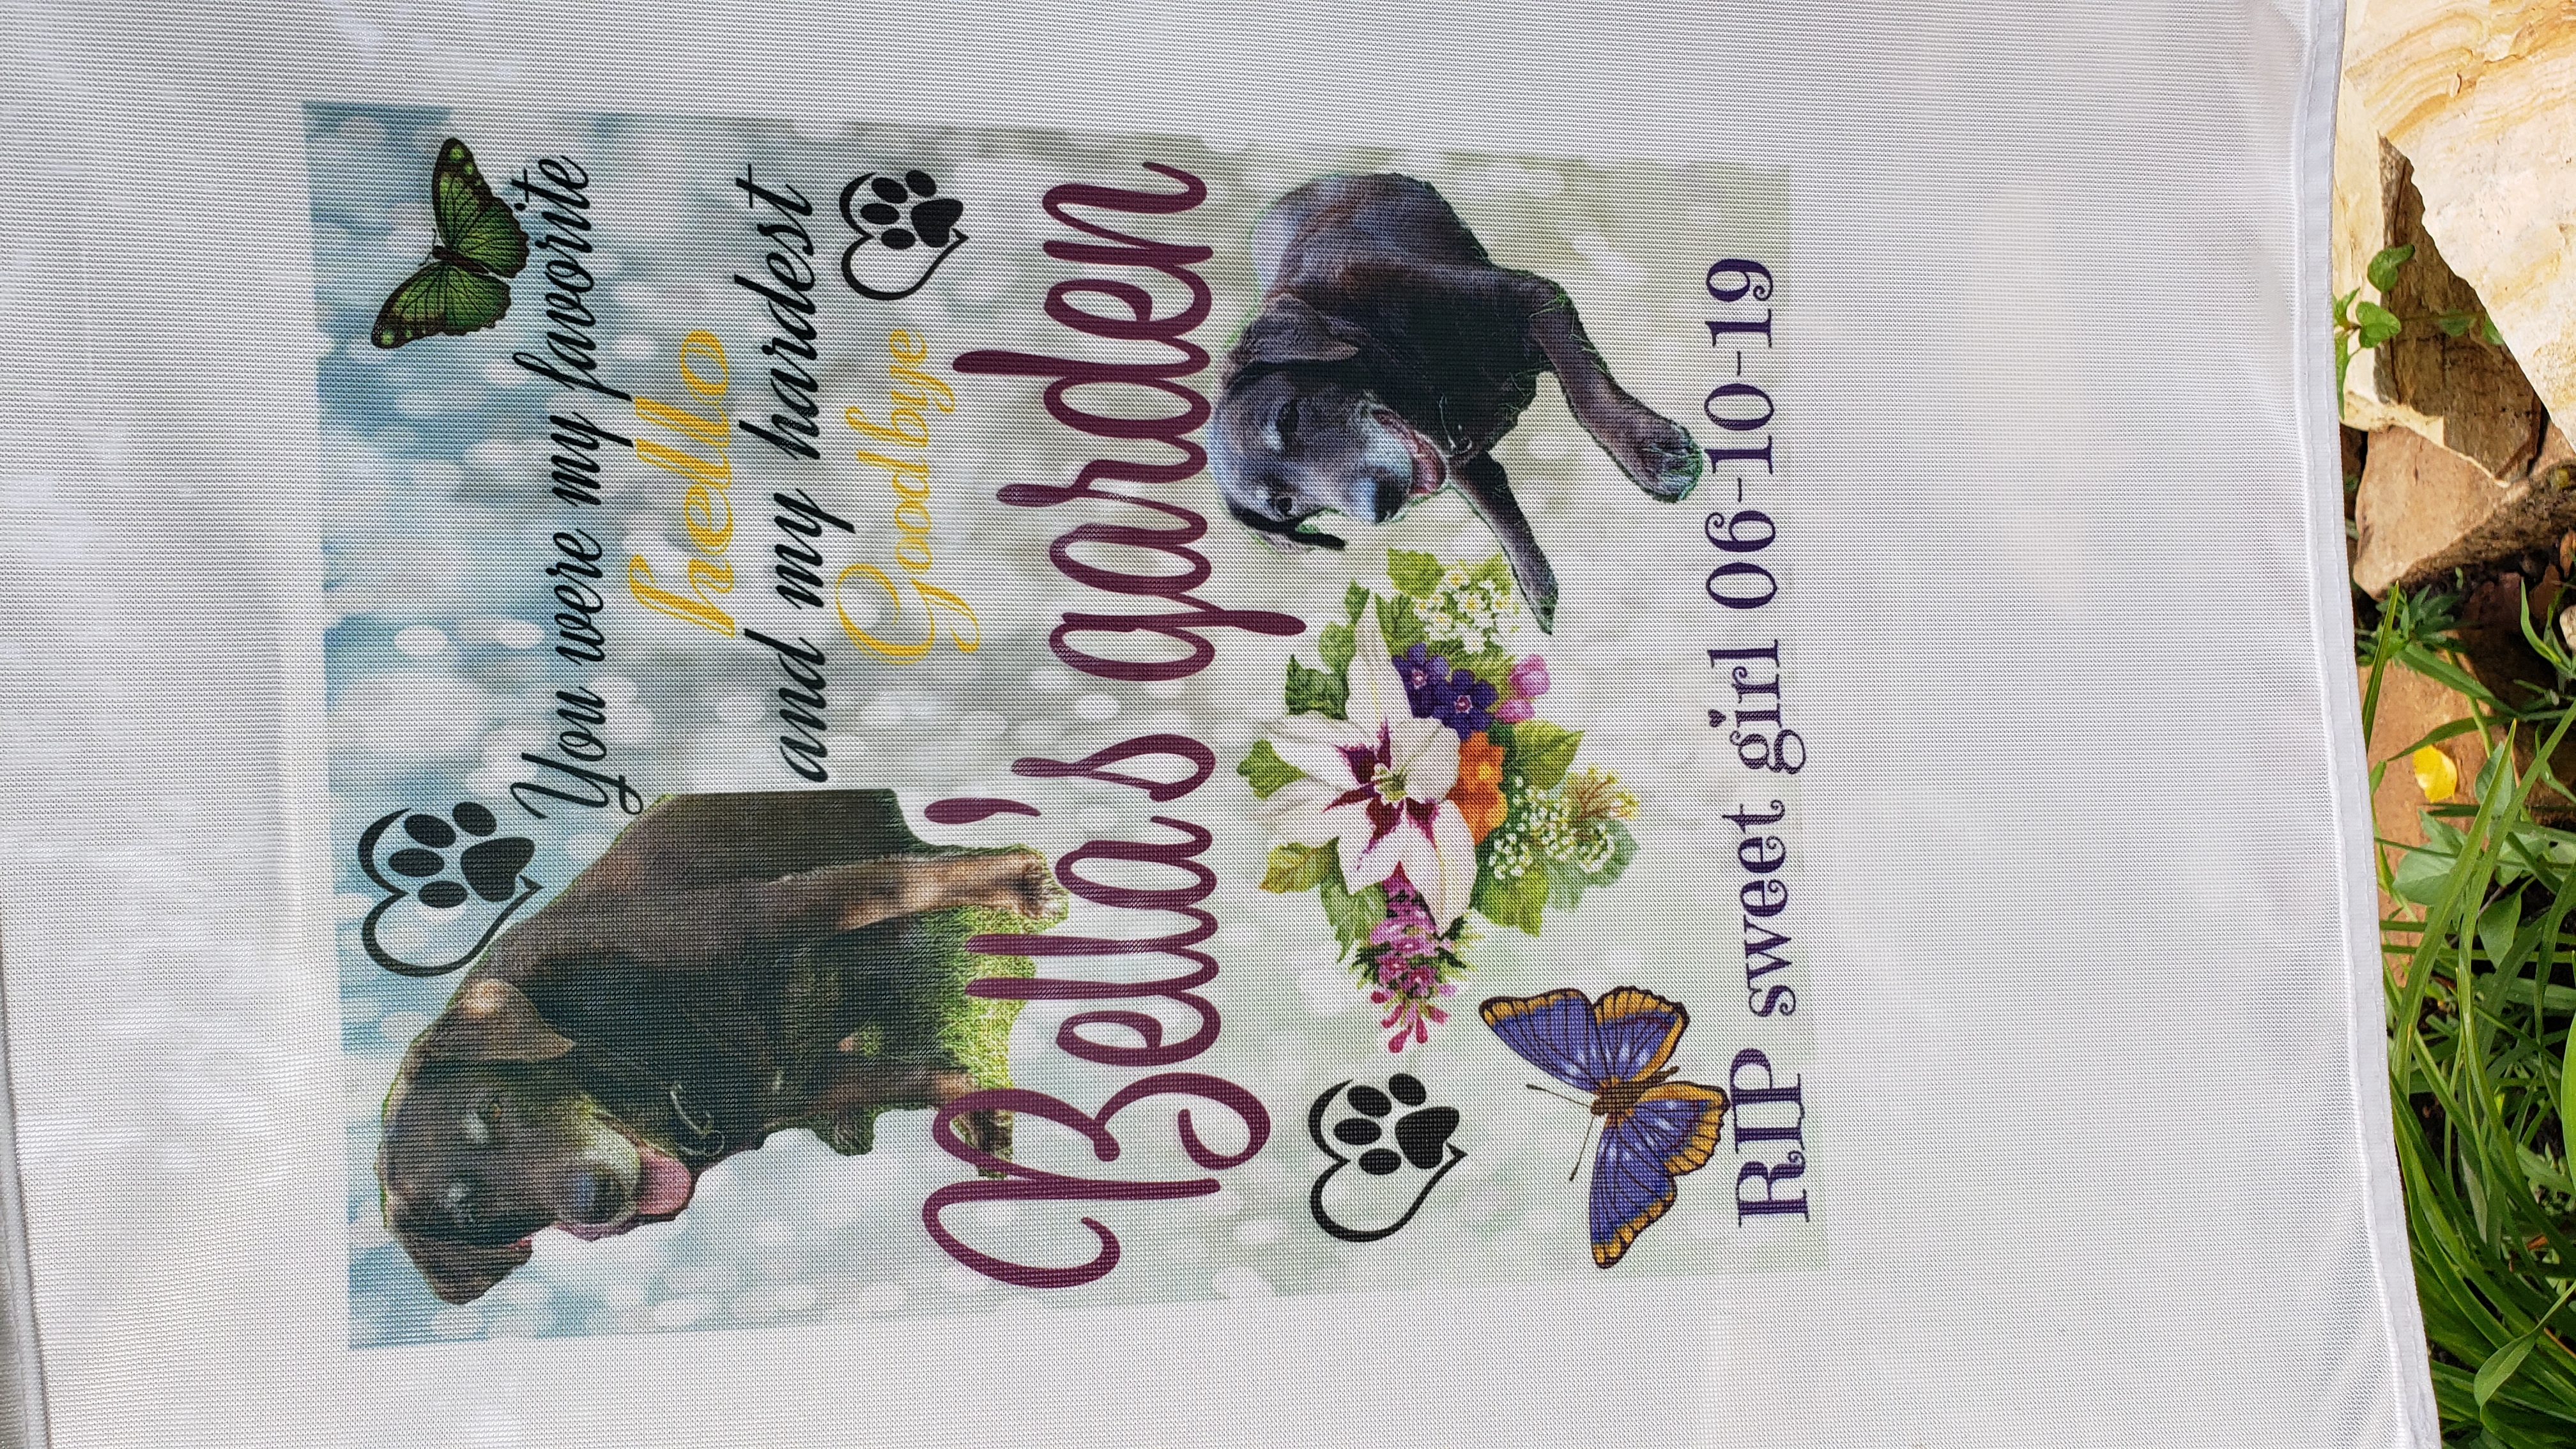 Well loved pup garden memorial flag made with sublimation printing